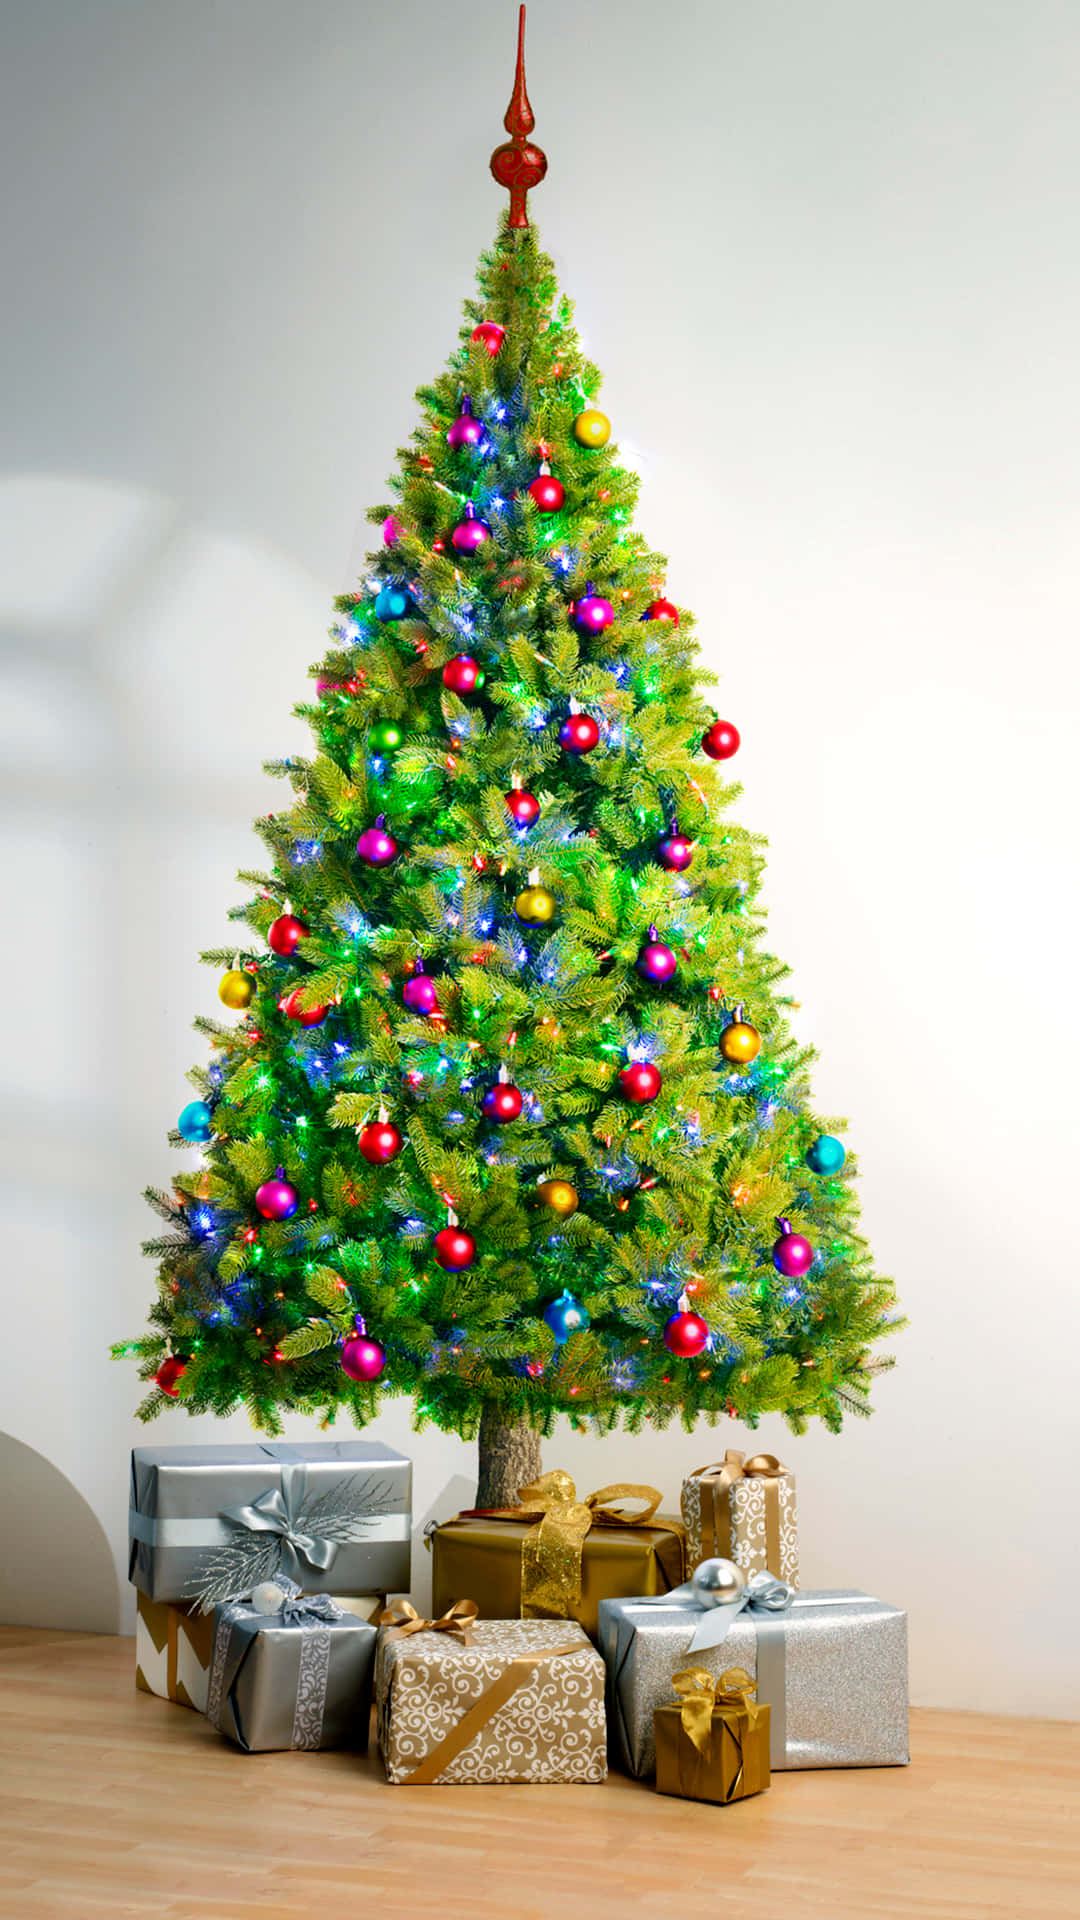 A cute Christmas tree dressed up with colorful decorations Wallpaper